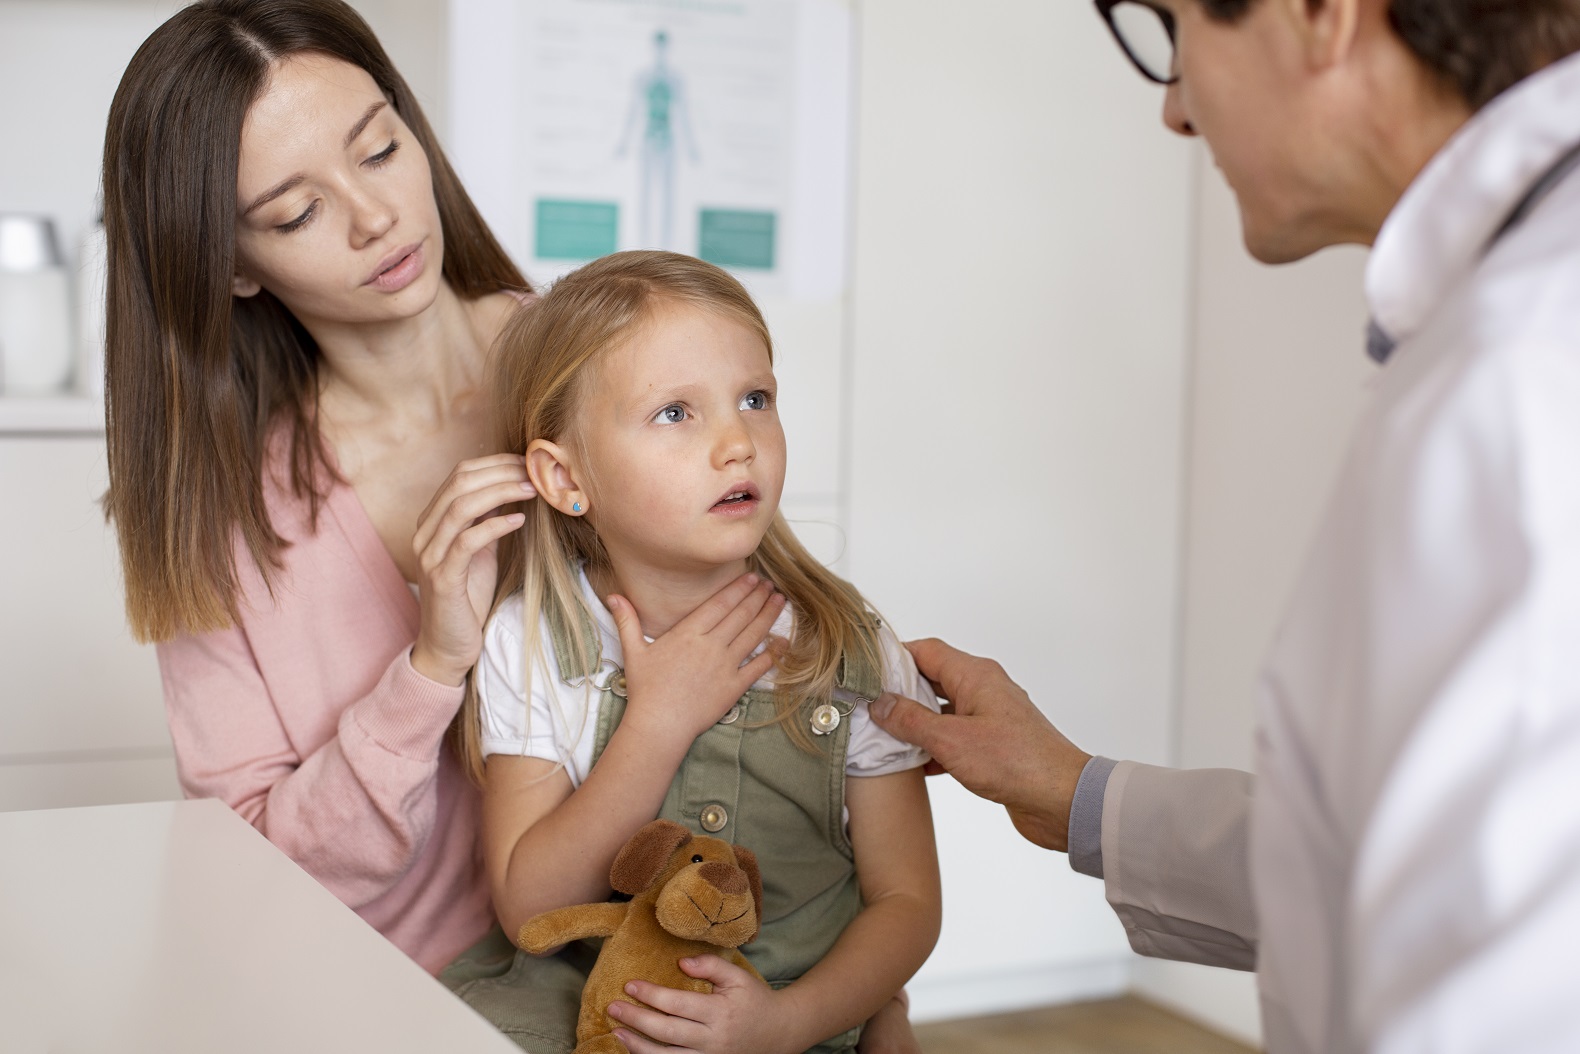 Does your child have tonsillitis